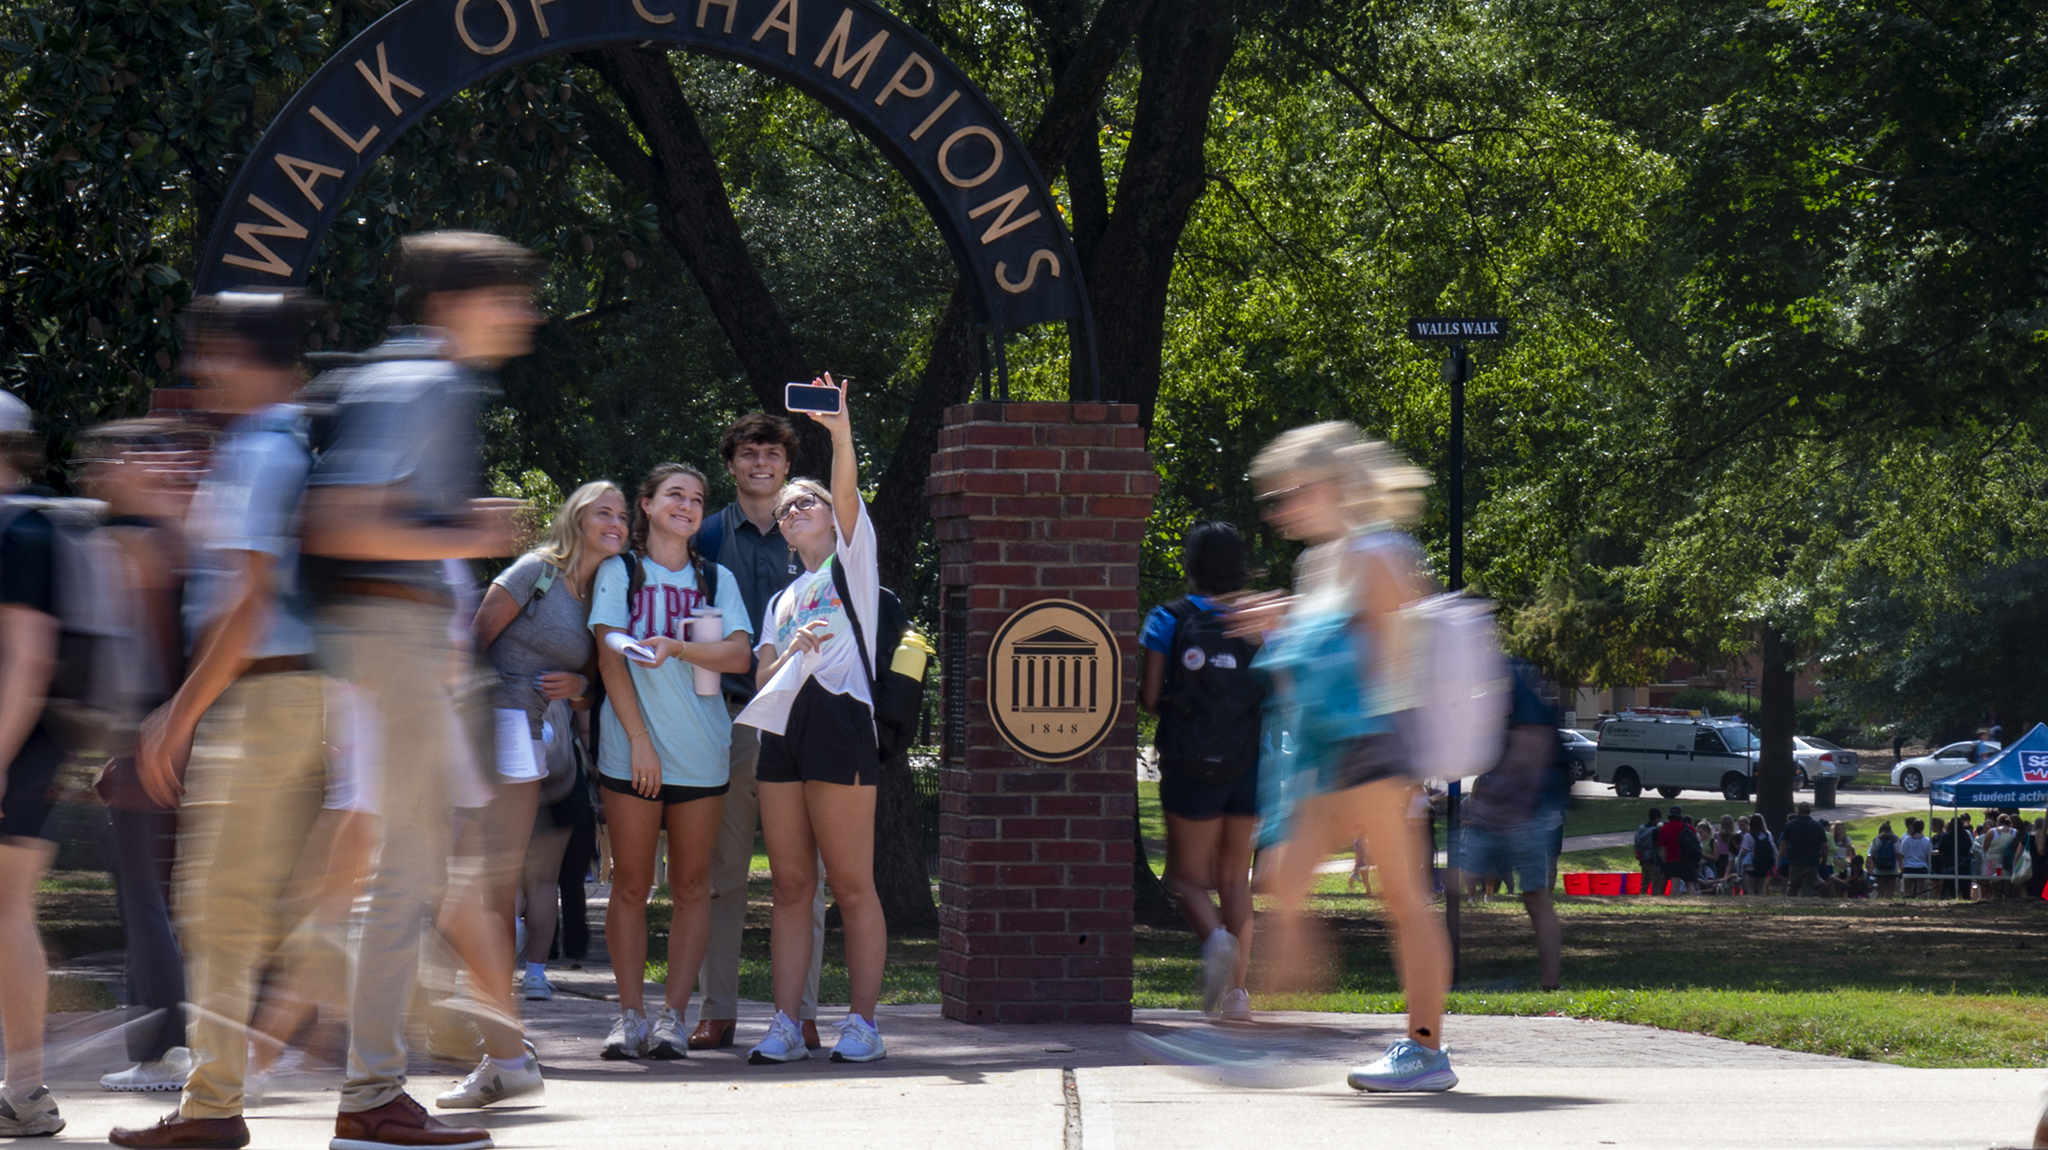 Students celebrate the fall semester with selfies on campus. The university welcomed its largest freshman class in history this fall, as well as its largest enrollment ever, with 24,710 students across its seven campuses. Photo by Srijita Chattopadhyay/Ole Miss Digital Imaging Services